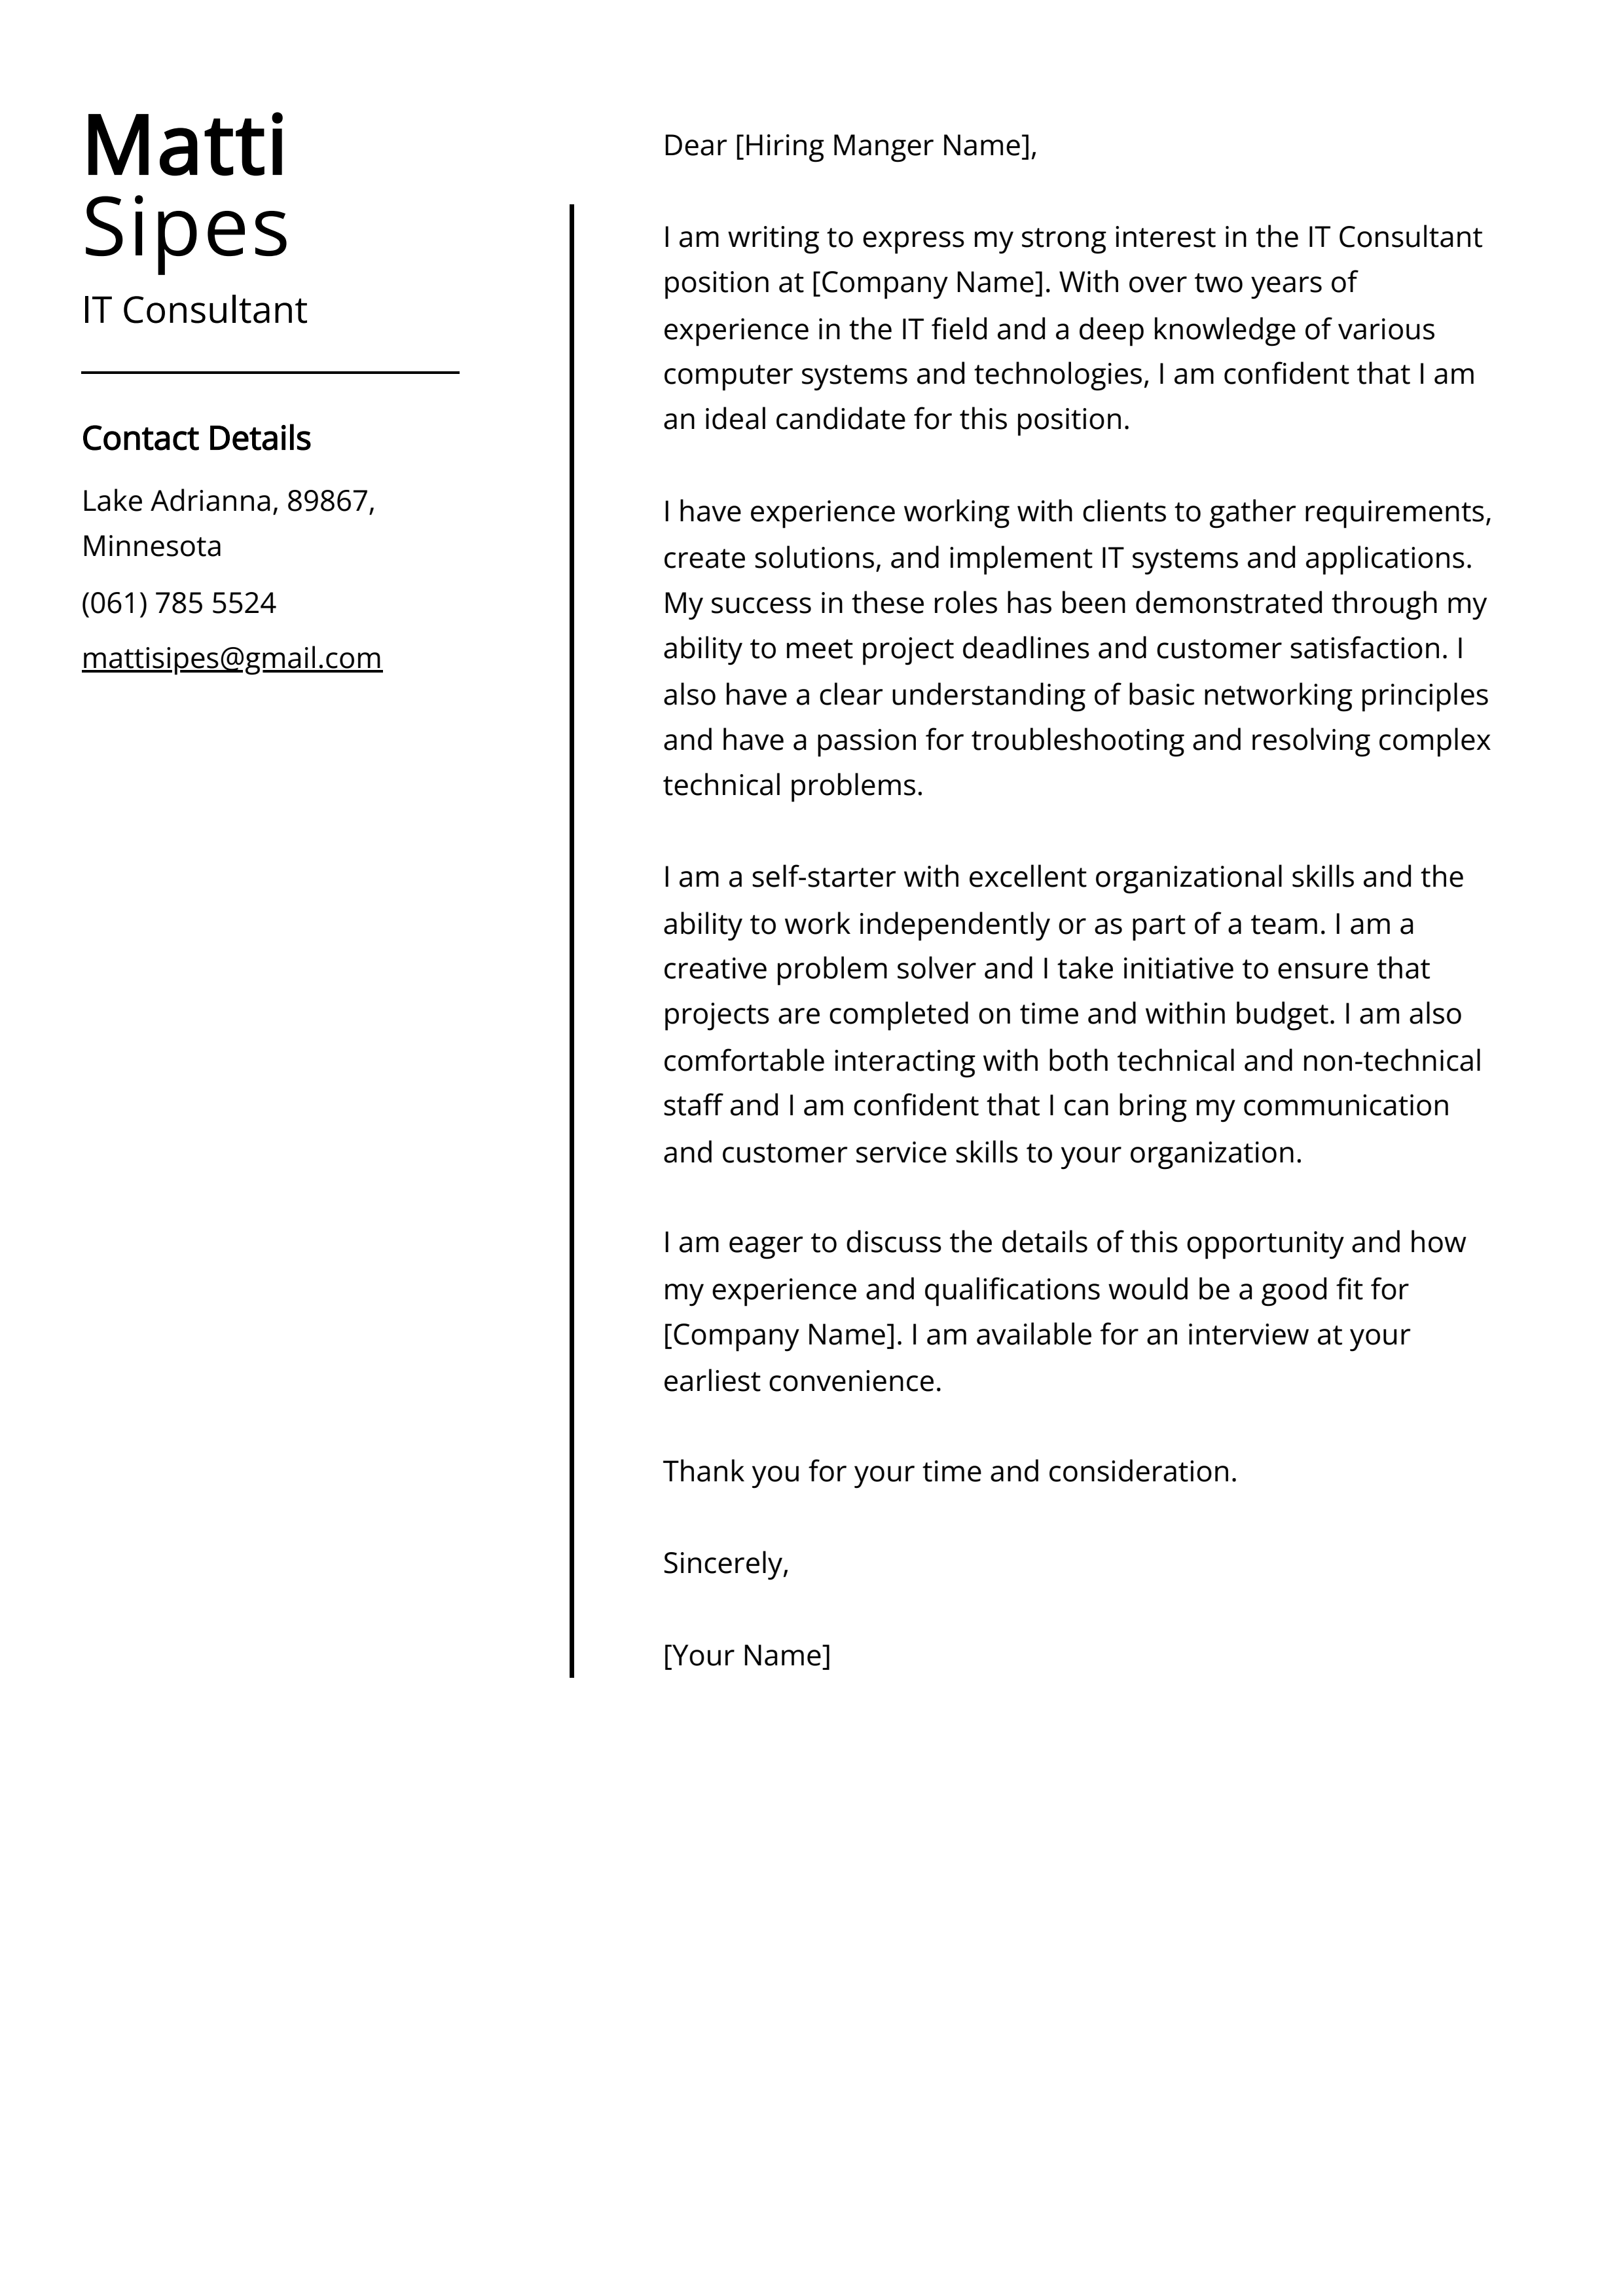 IT Consultant Cover Letter Example